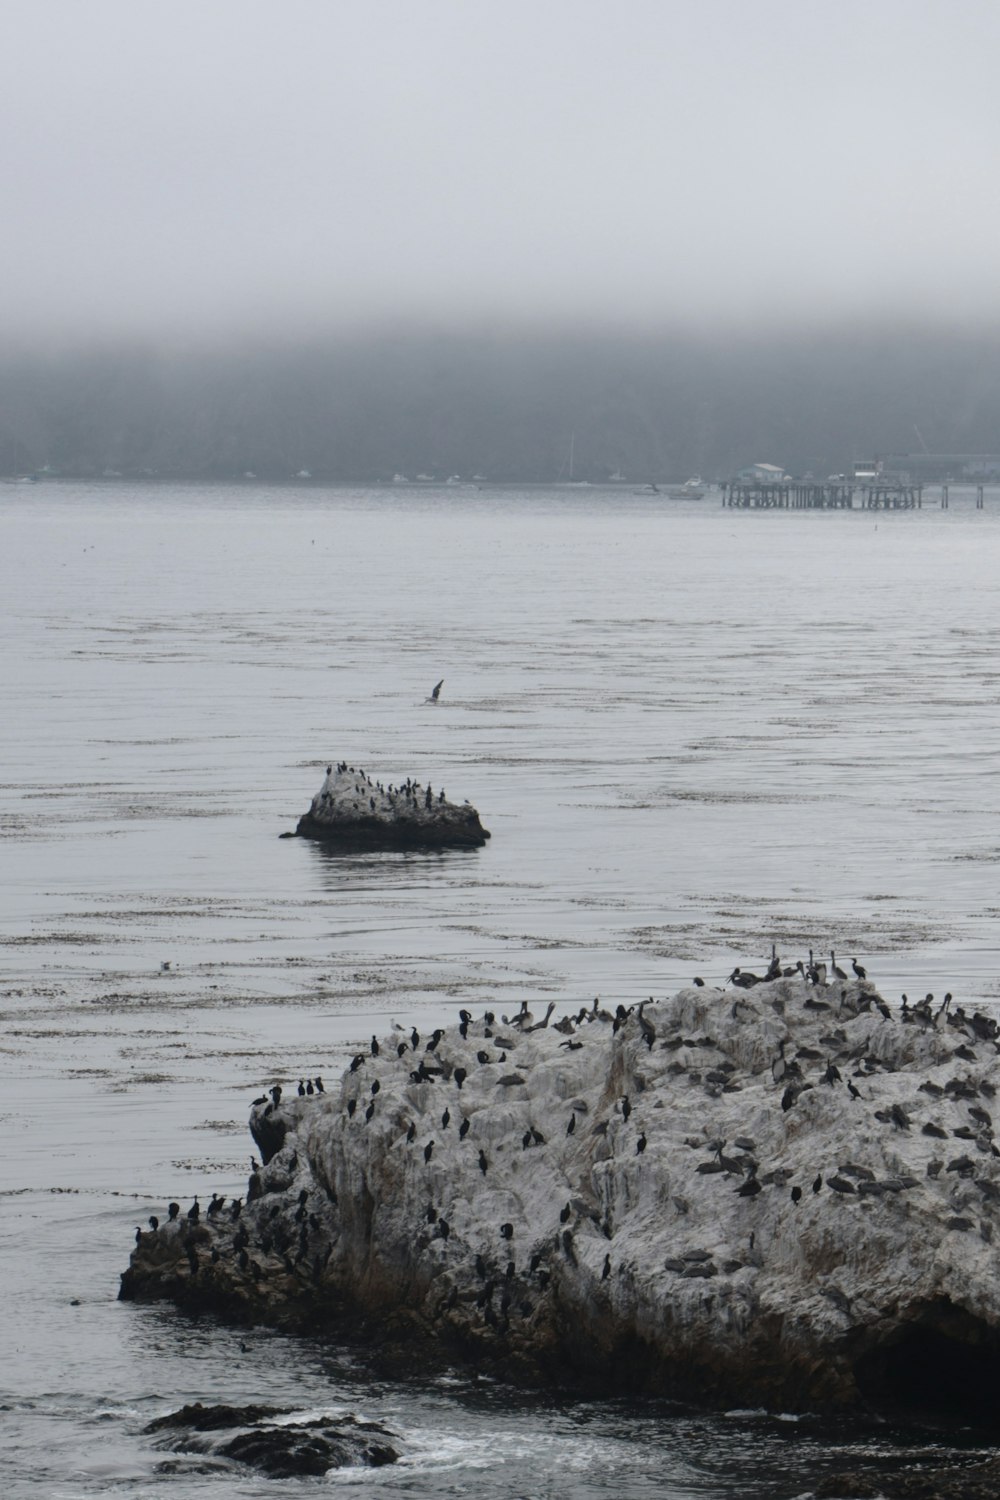 a flock of birds sitting on a rock in the water